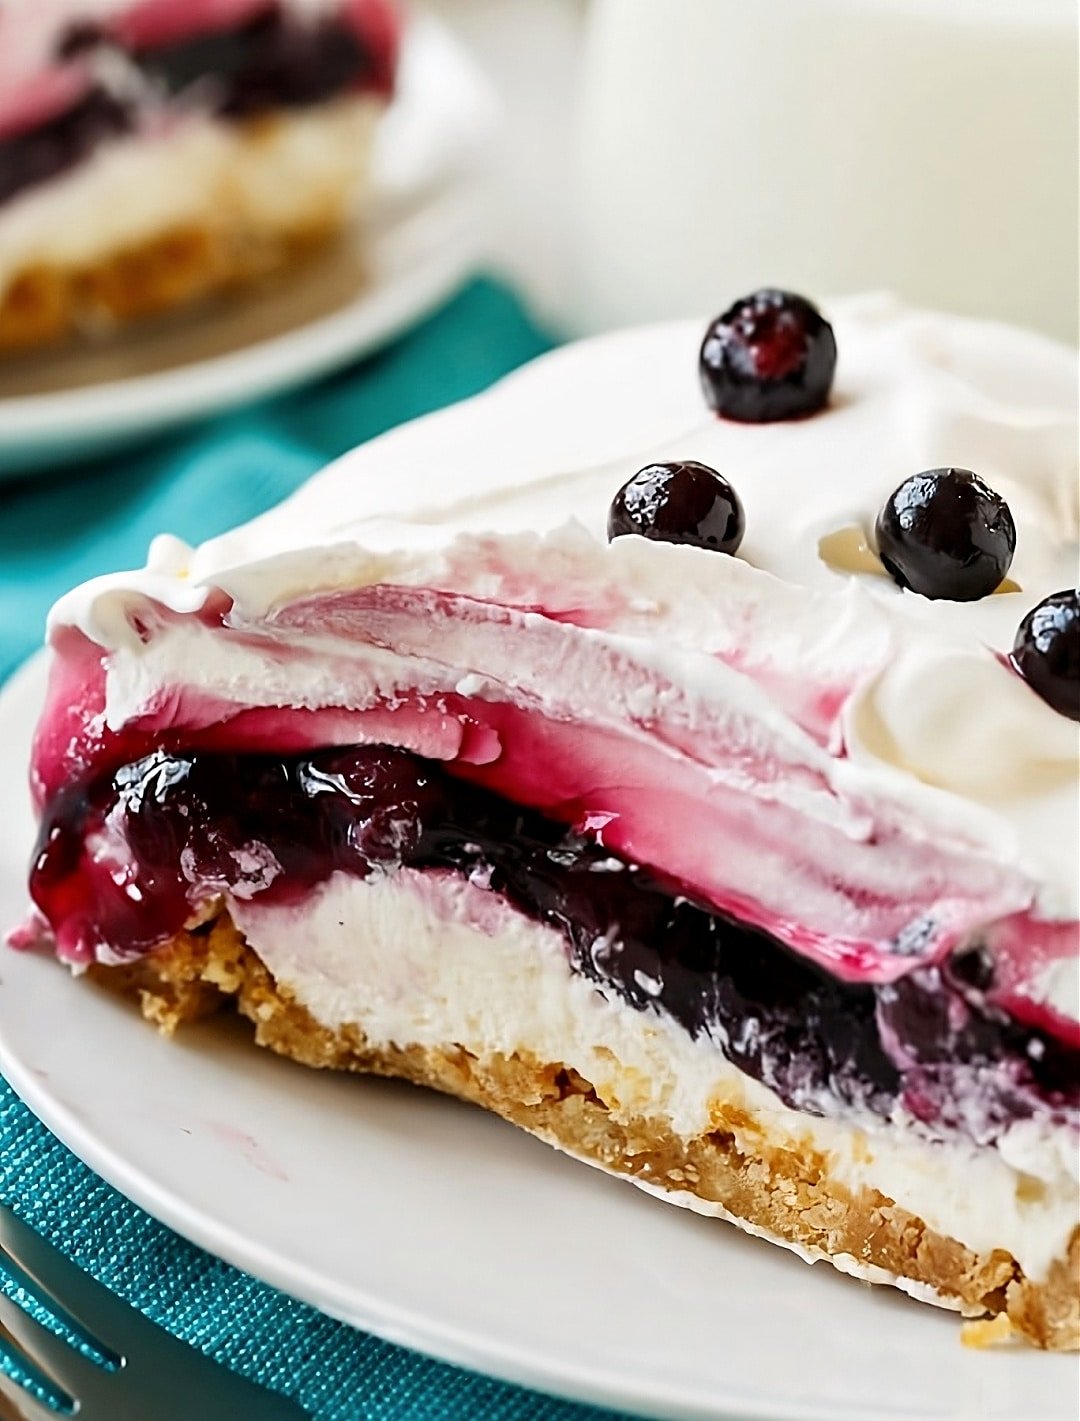 Close-up of Blueberry delight on a plate.